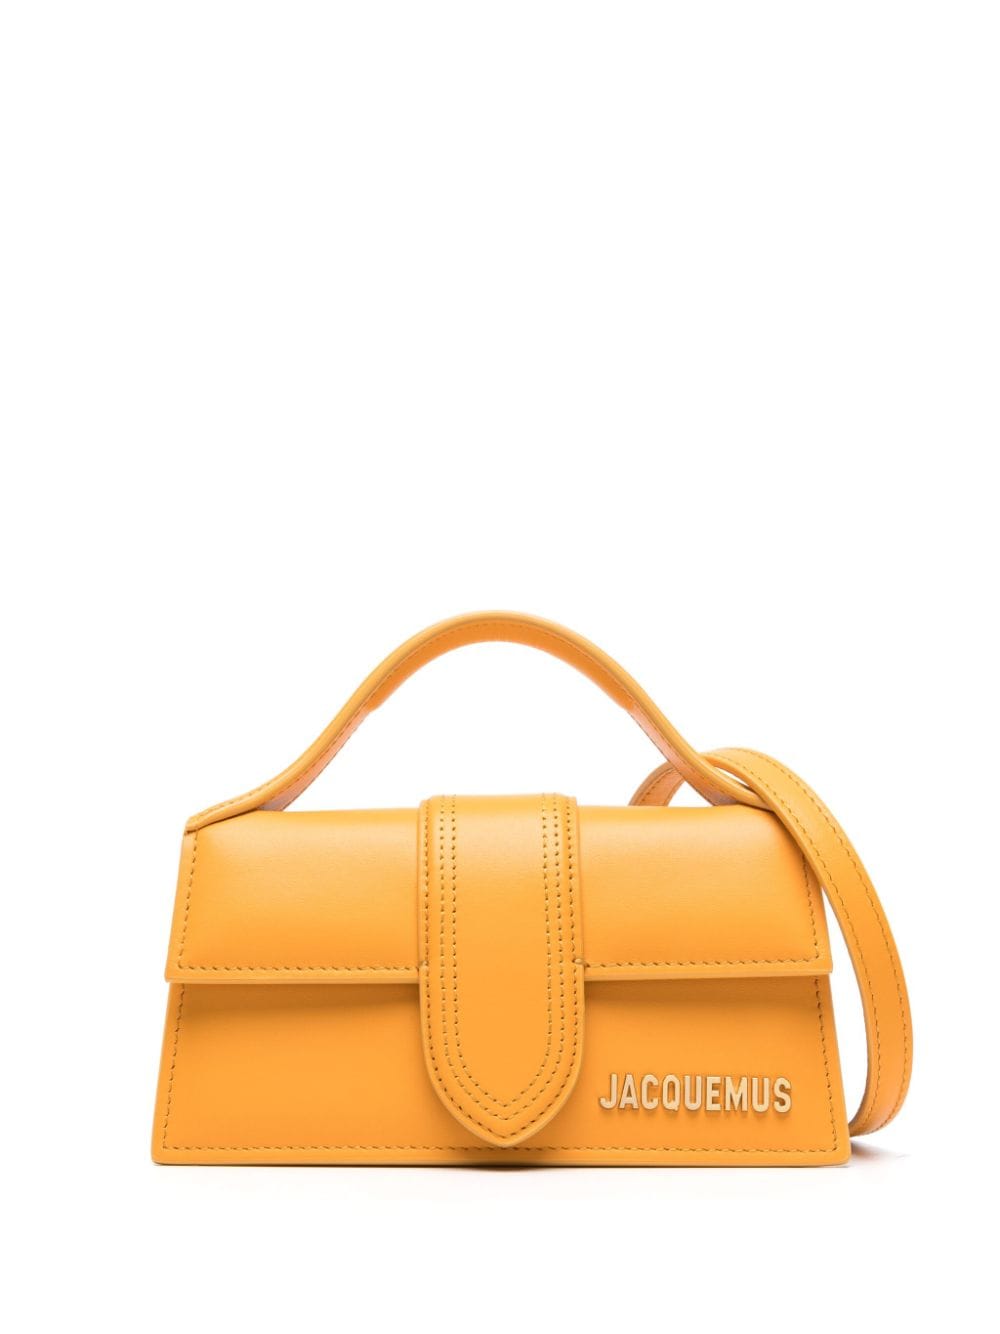 JACQUEMUS Amber Yellow Leather Handbag with Gold-Tone Logo and Detachable Strap for Women - SS24 Collection